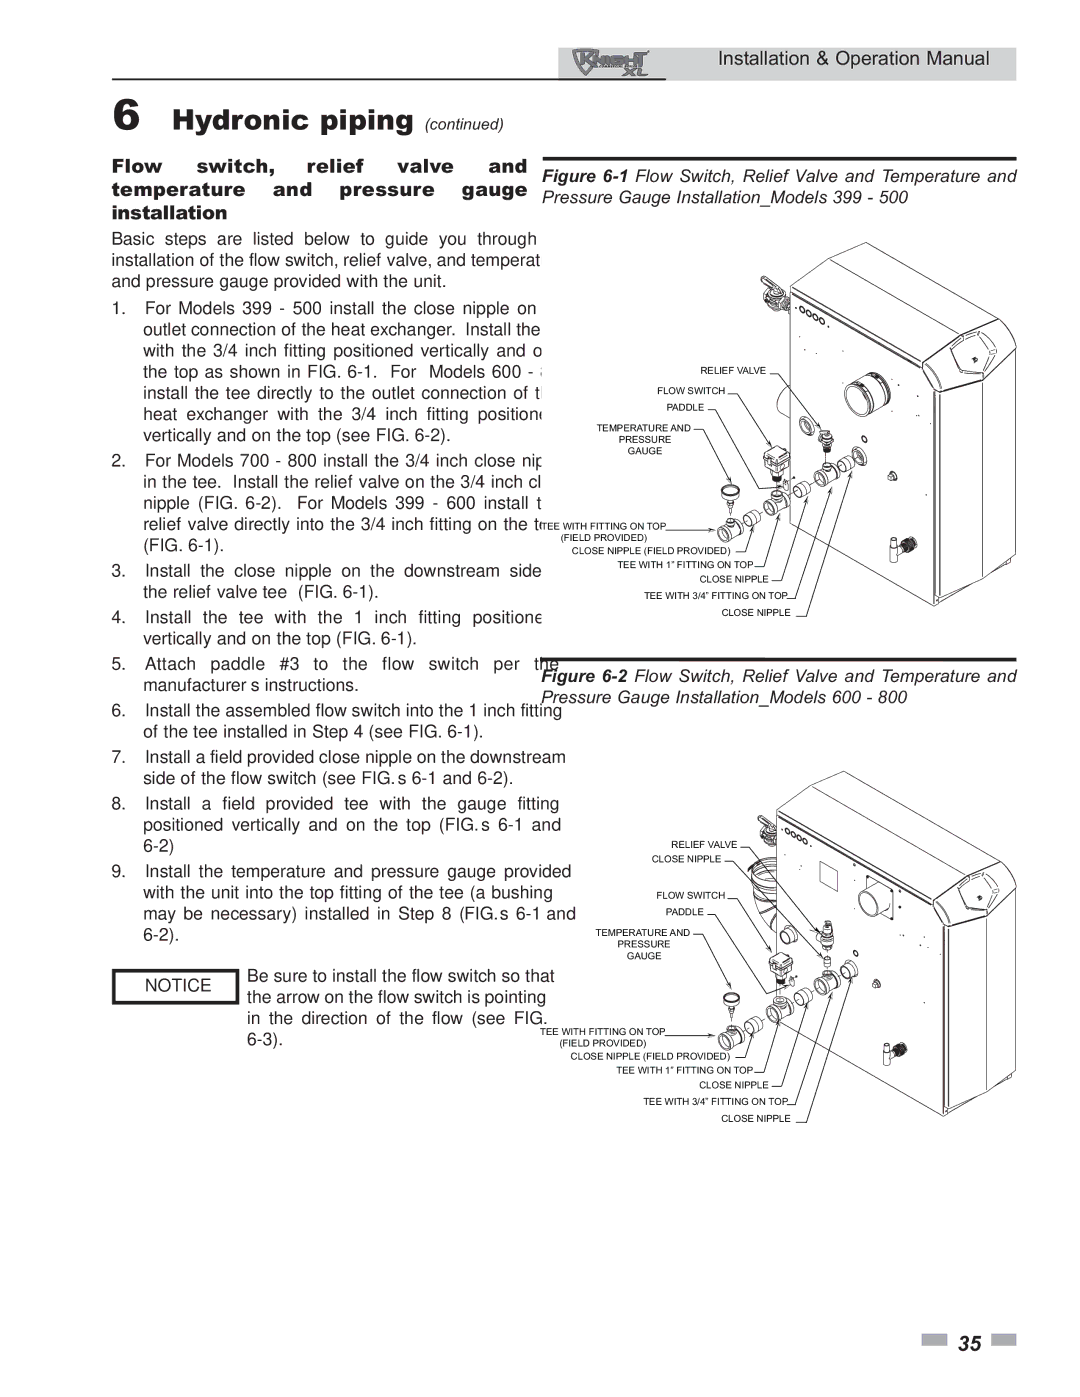 Lochinvar 800 operation manual Hydronic piping 